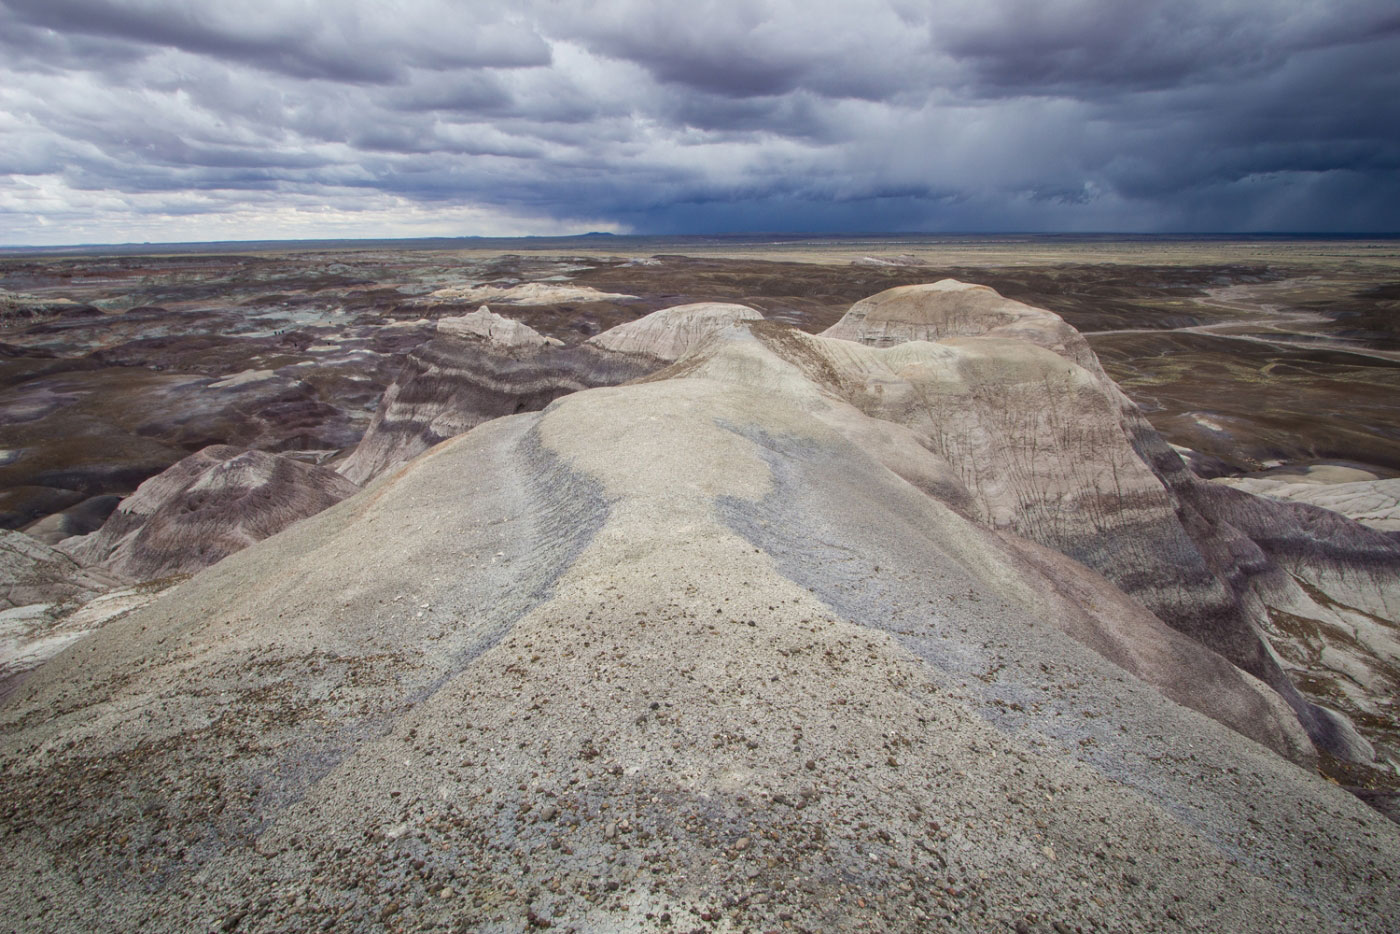 Hike Blue Forest and Blue Mesa Trails in Petrified Forest National Park, Arizona - Stav is Lost